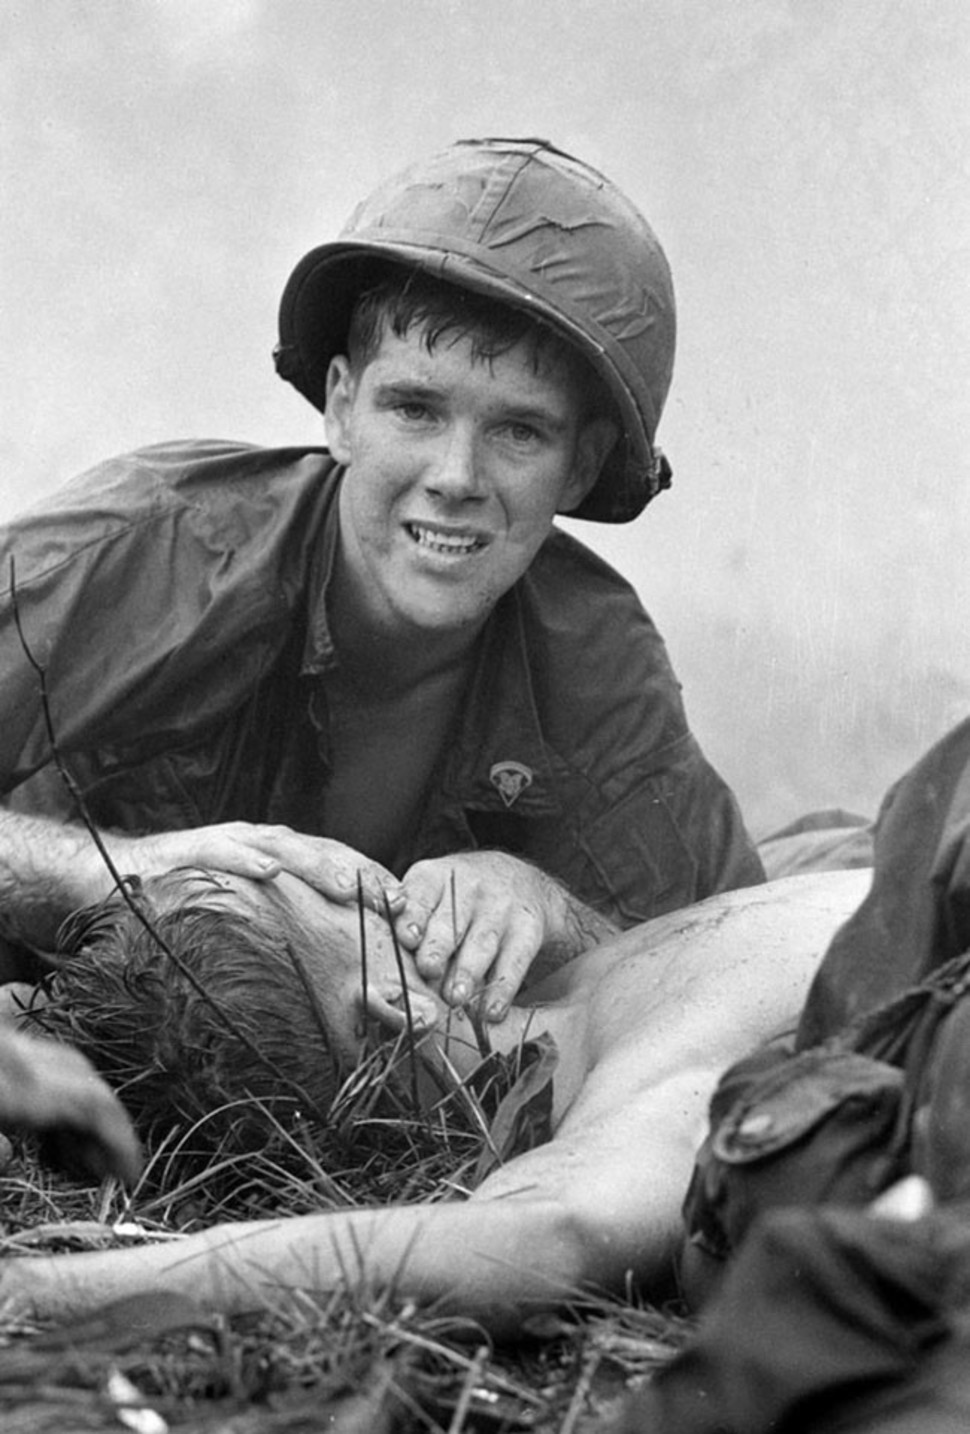 A US Medic attempts to save the life of a wounded comrade.